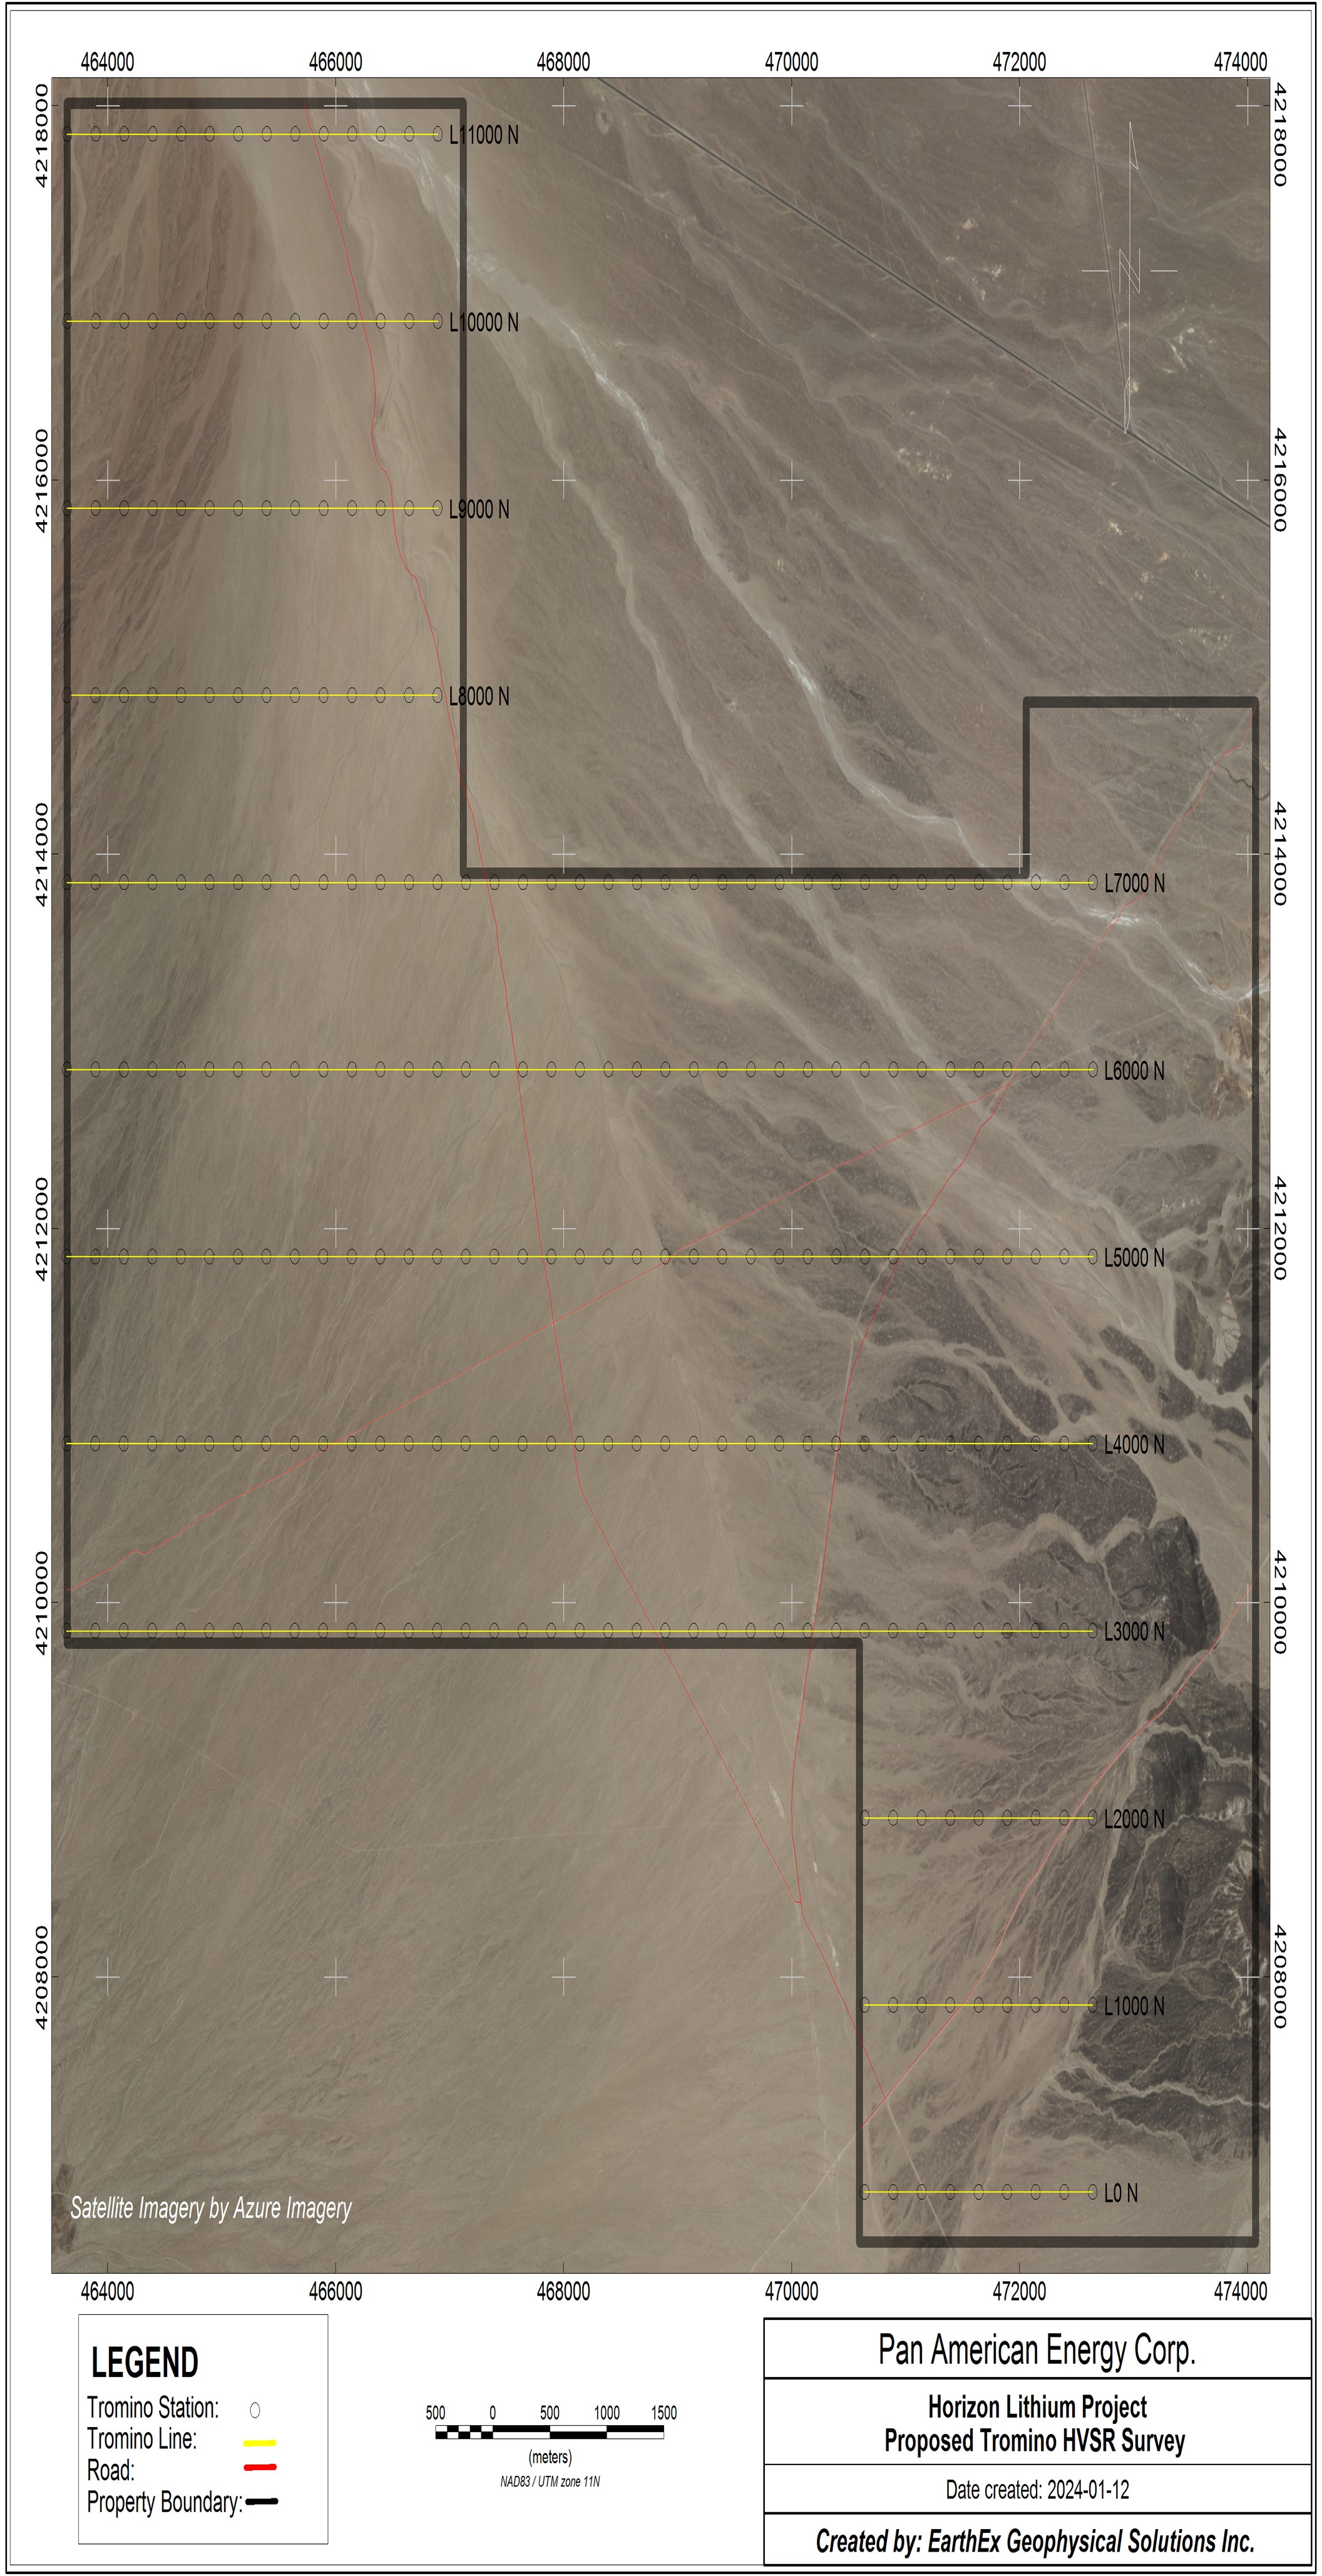 Outline of the Horizon Lithium Project (black), The Horizon Lithium boundary (black), proposed survey lines (yellow), and access roads (red polylines). The survey is estimated to comprise 86 line-km with a line spacing of 1,000 m and 250 m station spacing